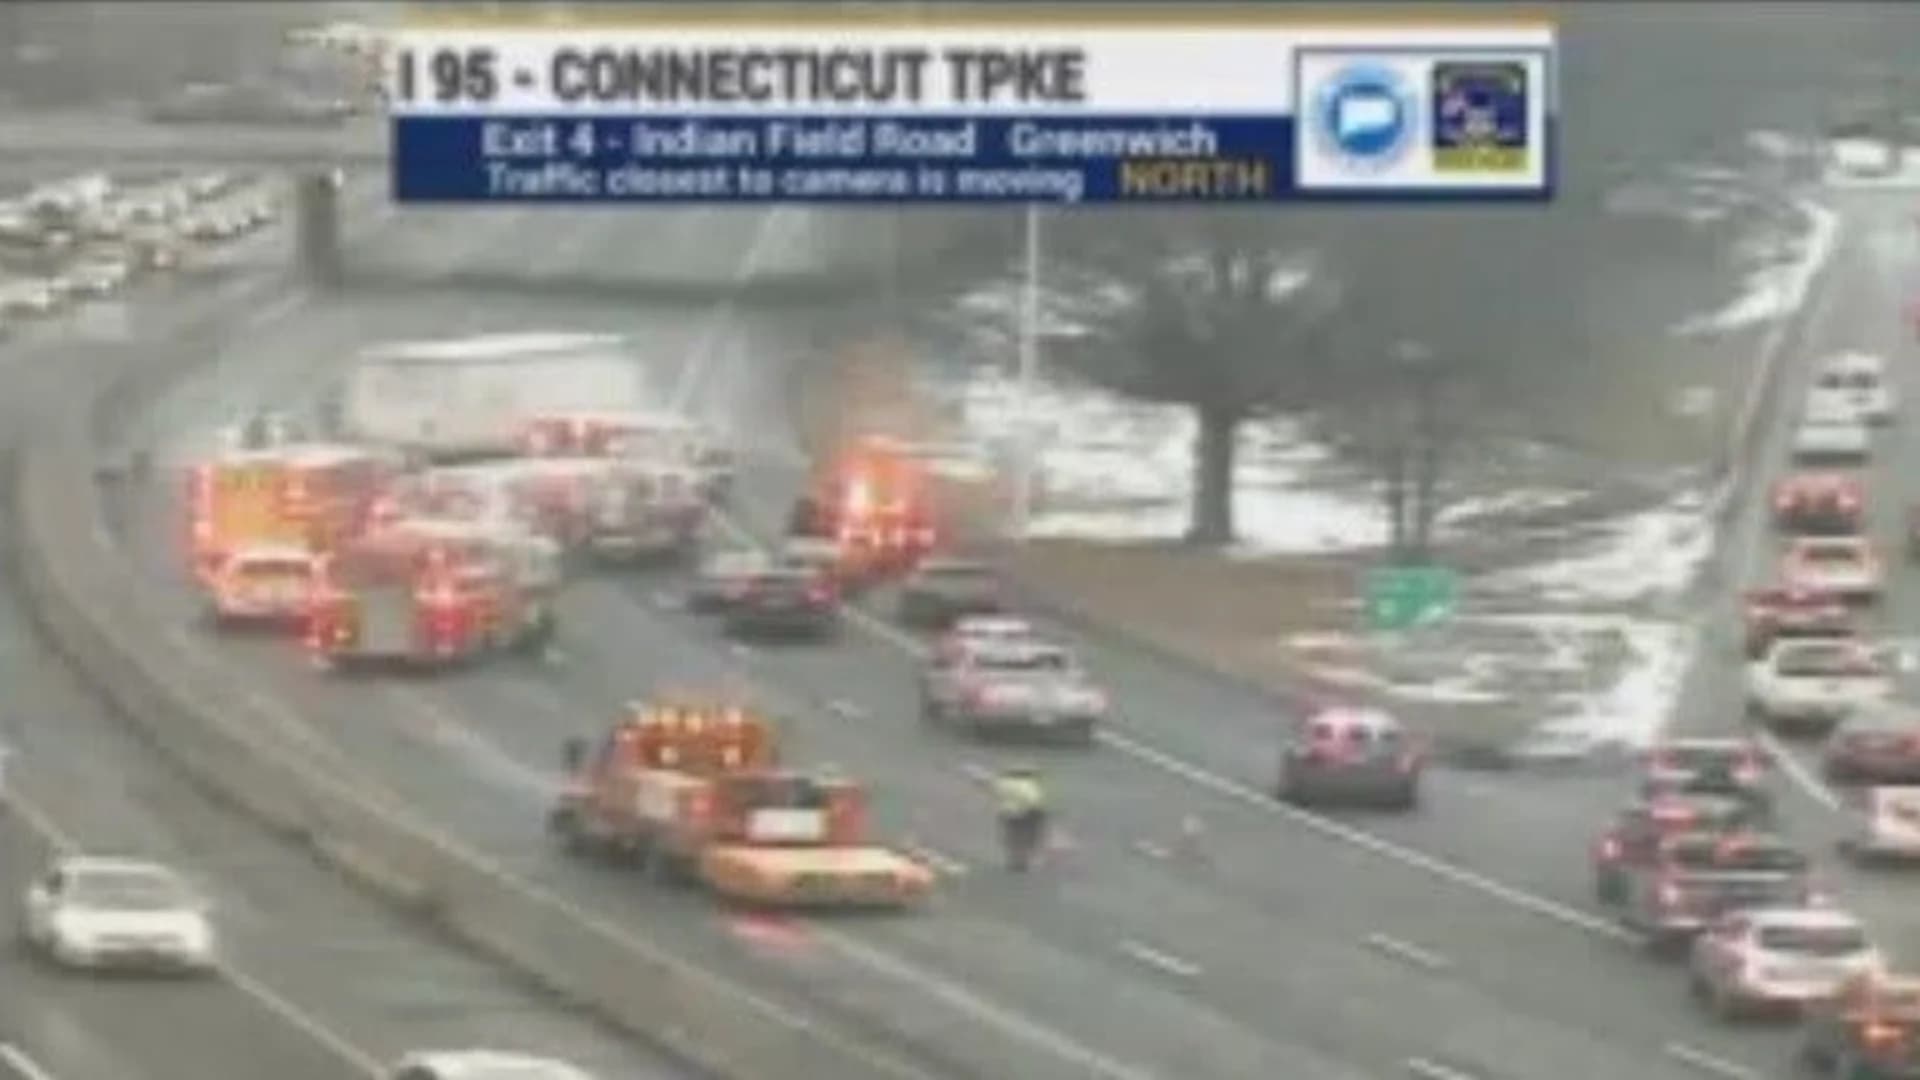 All lanes open following tractor-trailer accident on I-95 in Greenwich